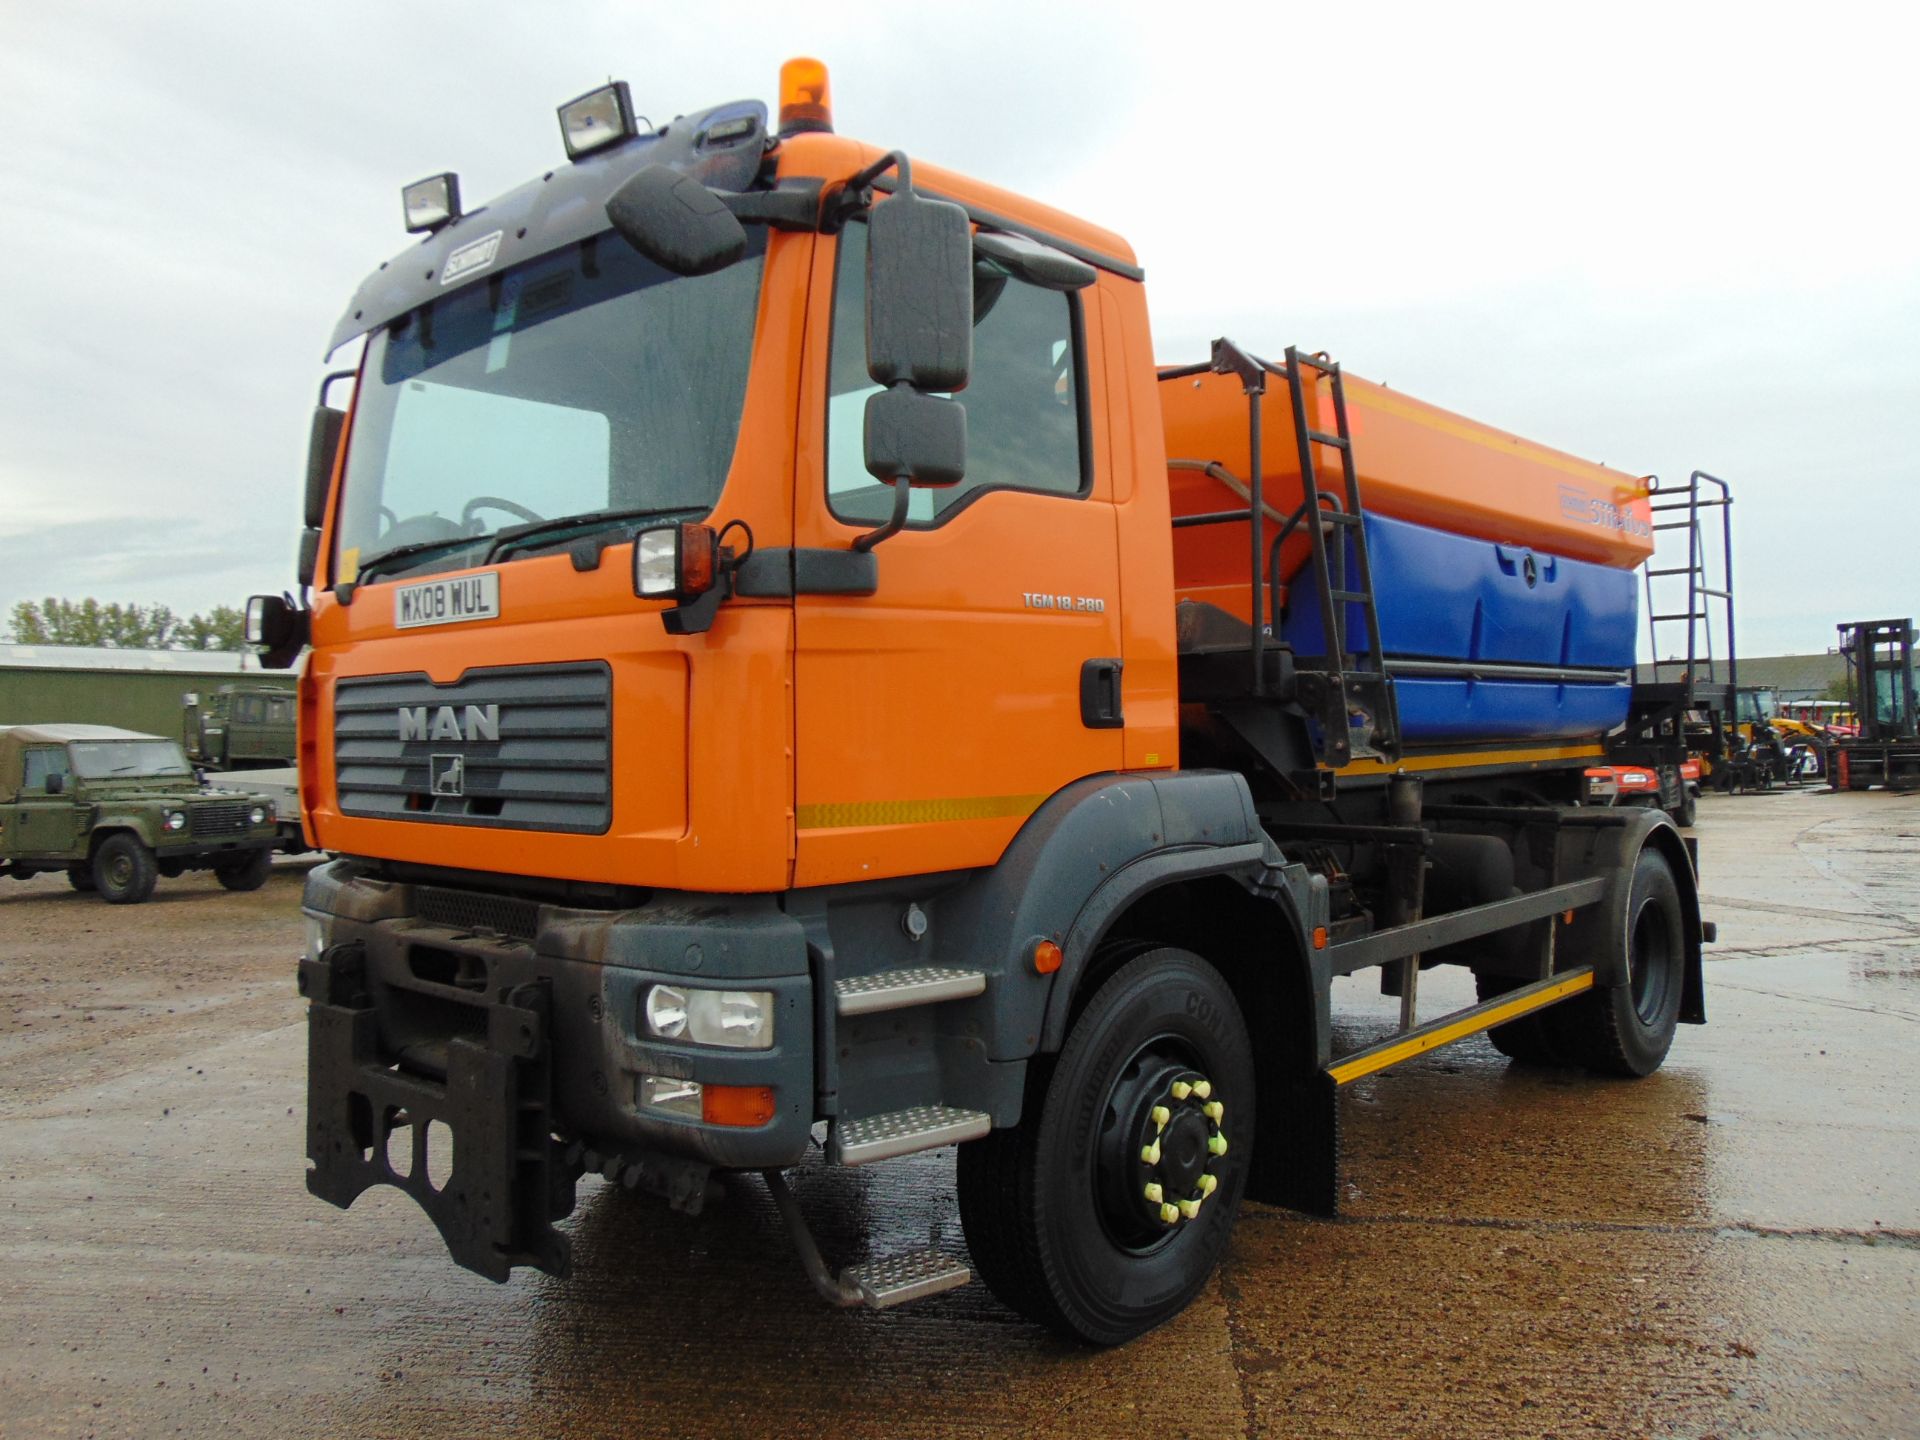 2008 MAN TGM 18.280 18T 4wd Gritter Lorry C/W Schmidt Gritter Body 34,000 kms only - Image 3 of 23